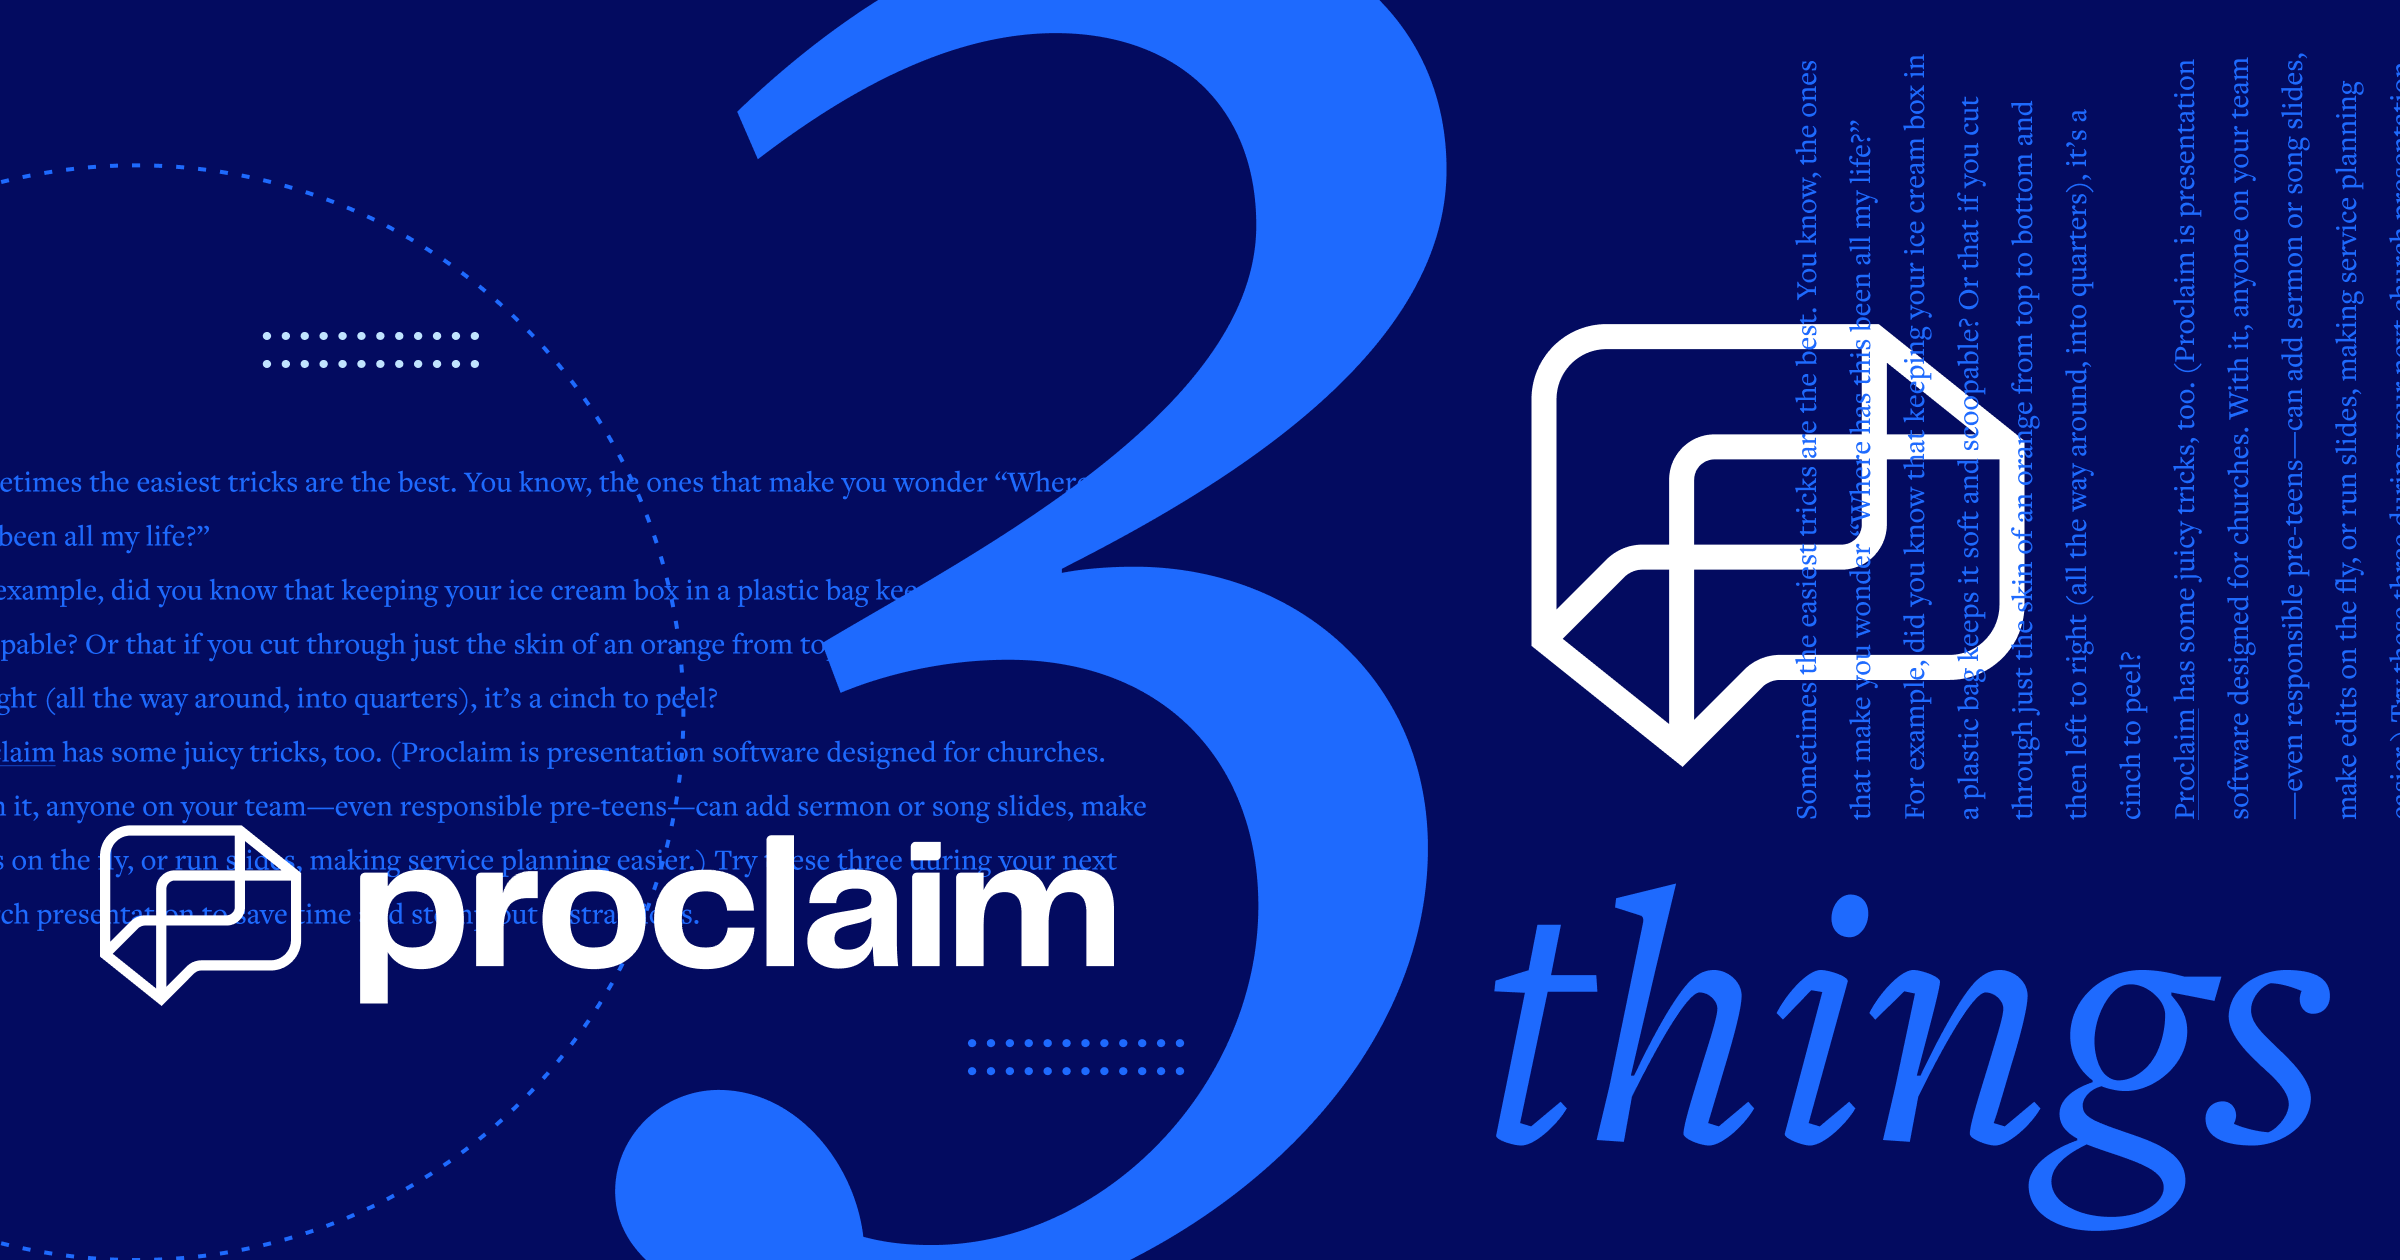 Collage with 3 things in large type representing 3 things you can do in Proclaim